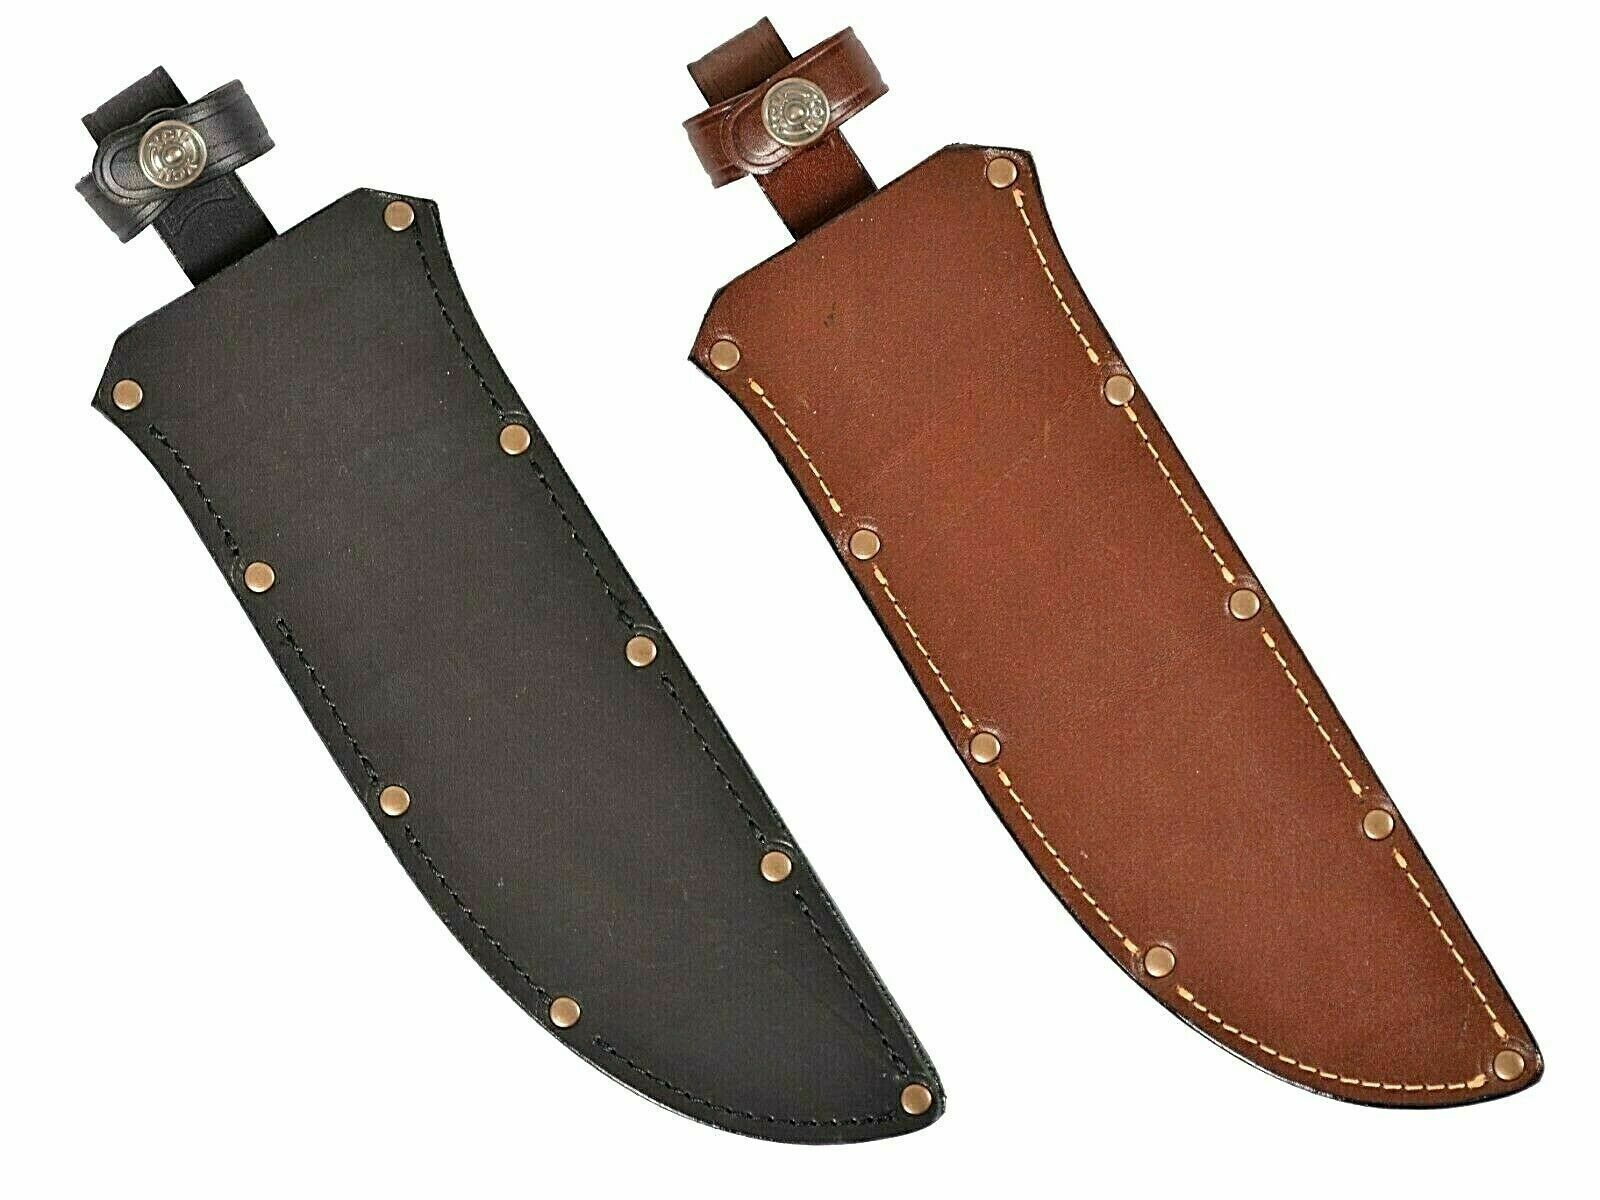 Leather sheath German style for a hunting knife 5-9 inch (13-23 cm) knife case